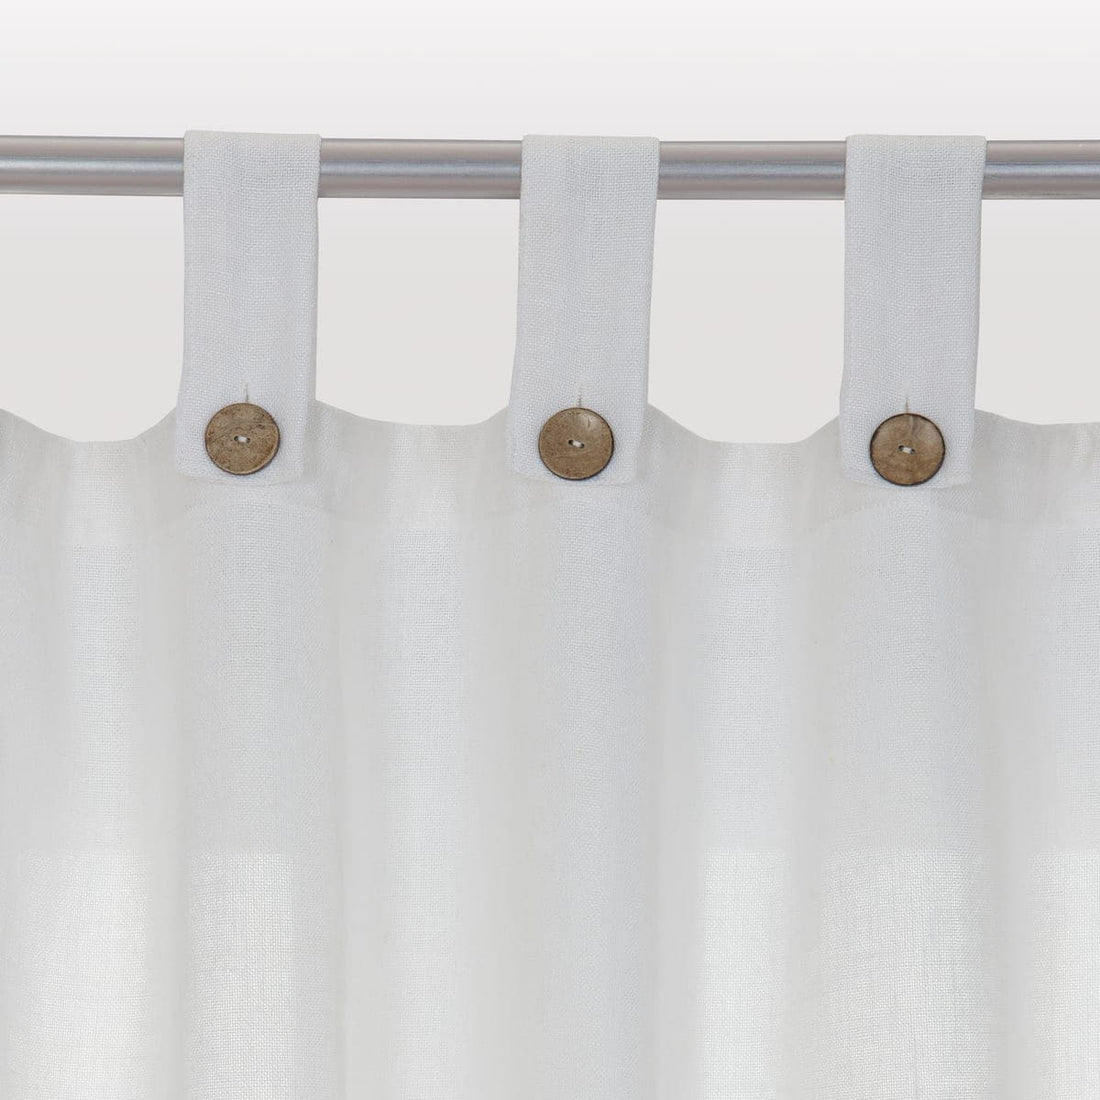 CHARLINA WHITE OPAQUE CURTAIN 140X280 WITH LOOPS AND BUTTONS - best price from Maltashopper.com BR480008027